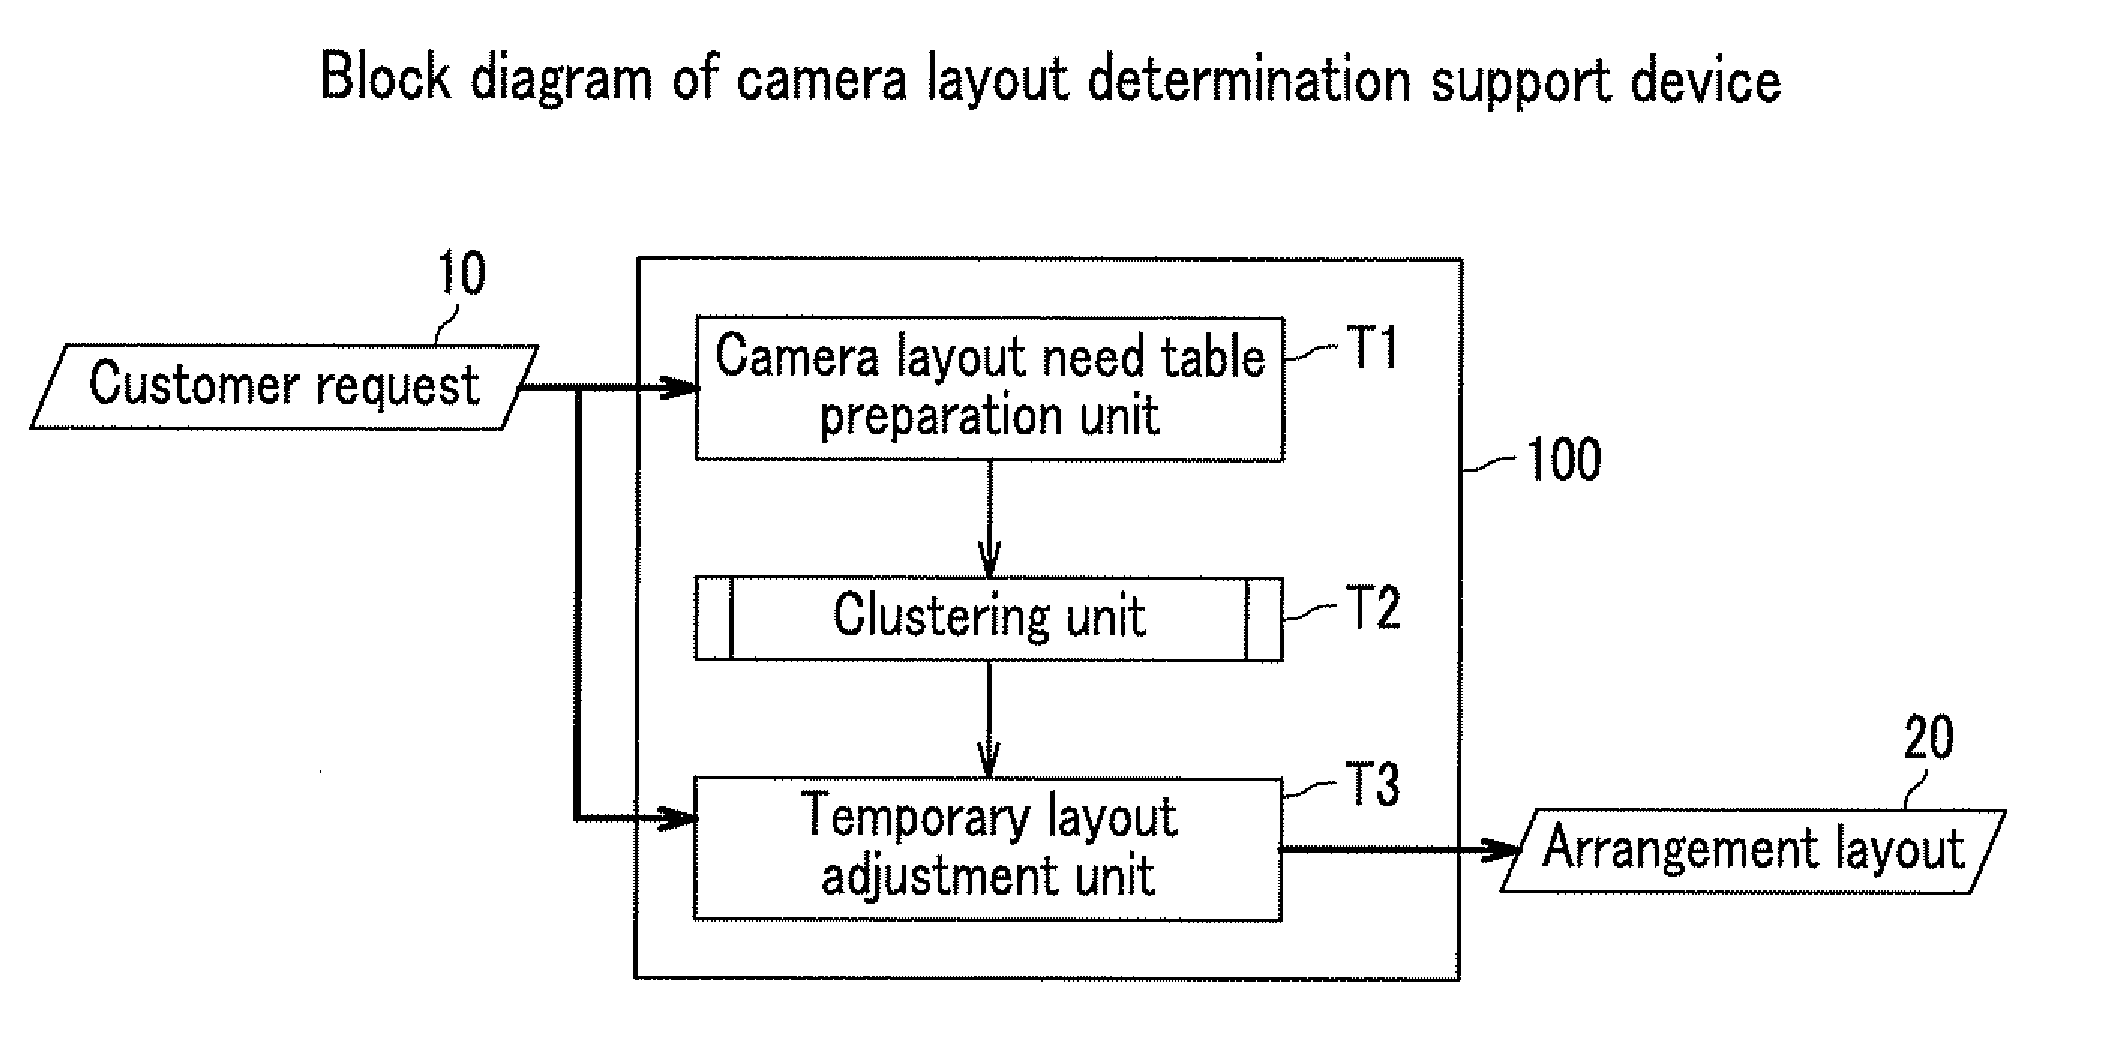 Camera layout determination support device